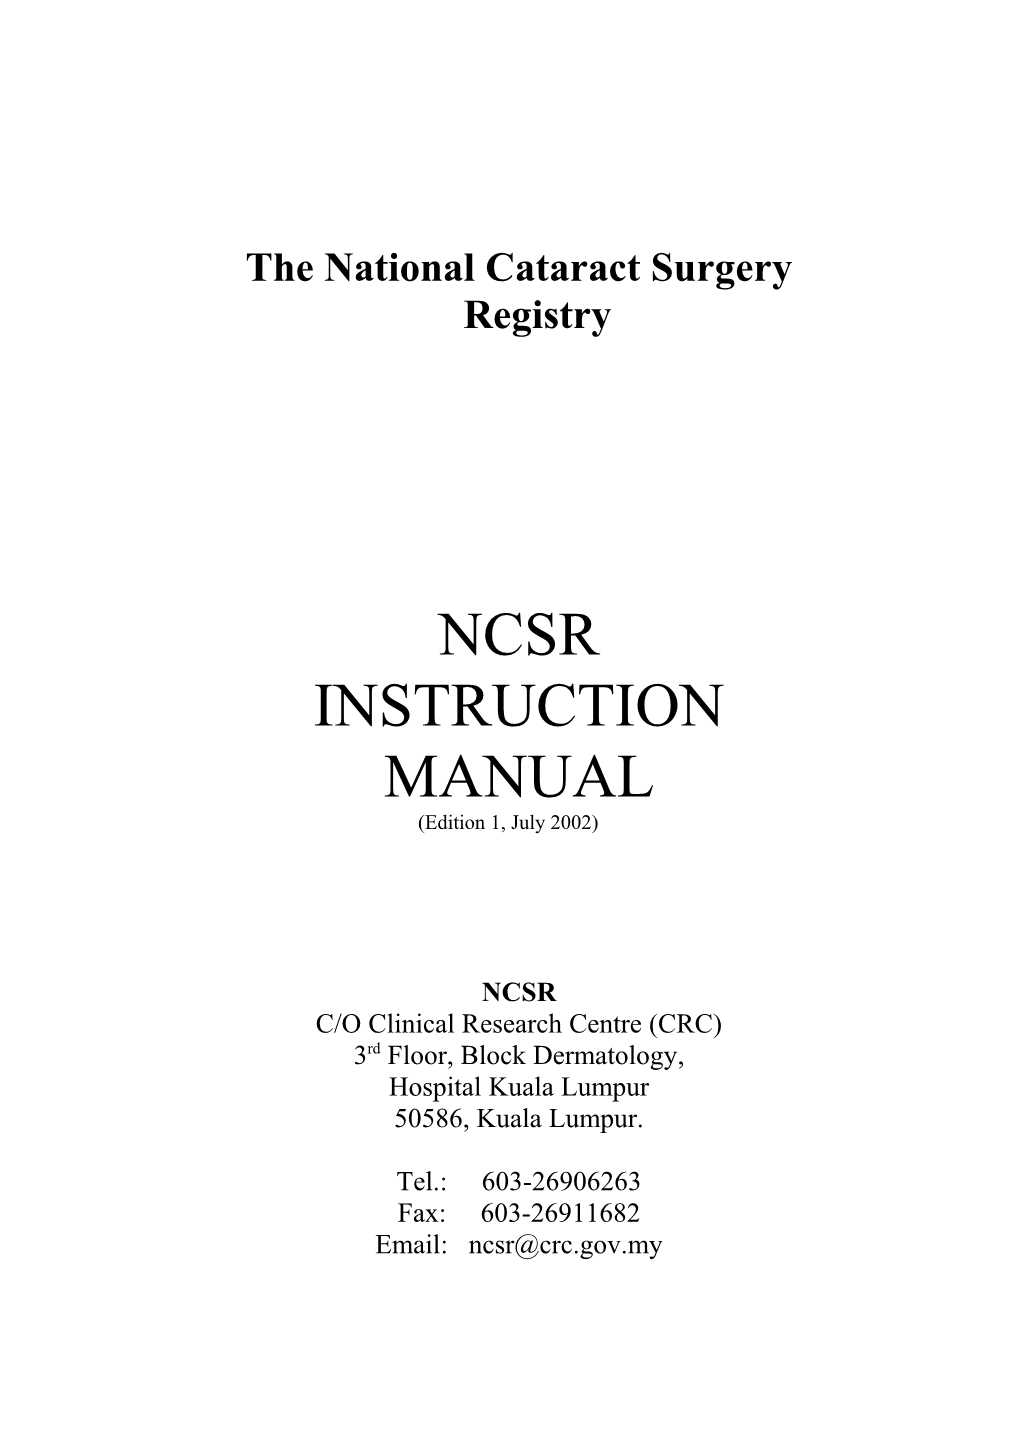 Instruction for National Cataract Surgery Registry